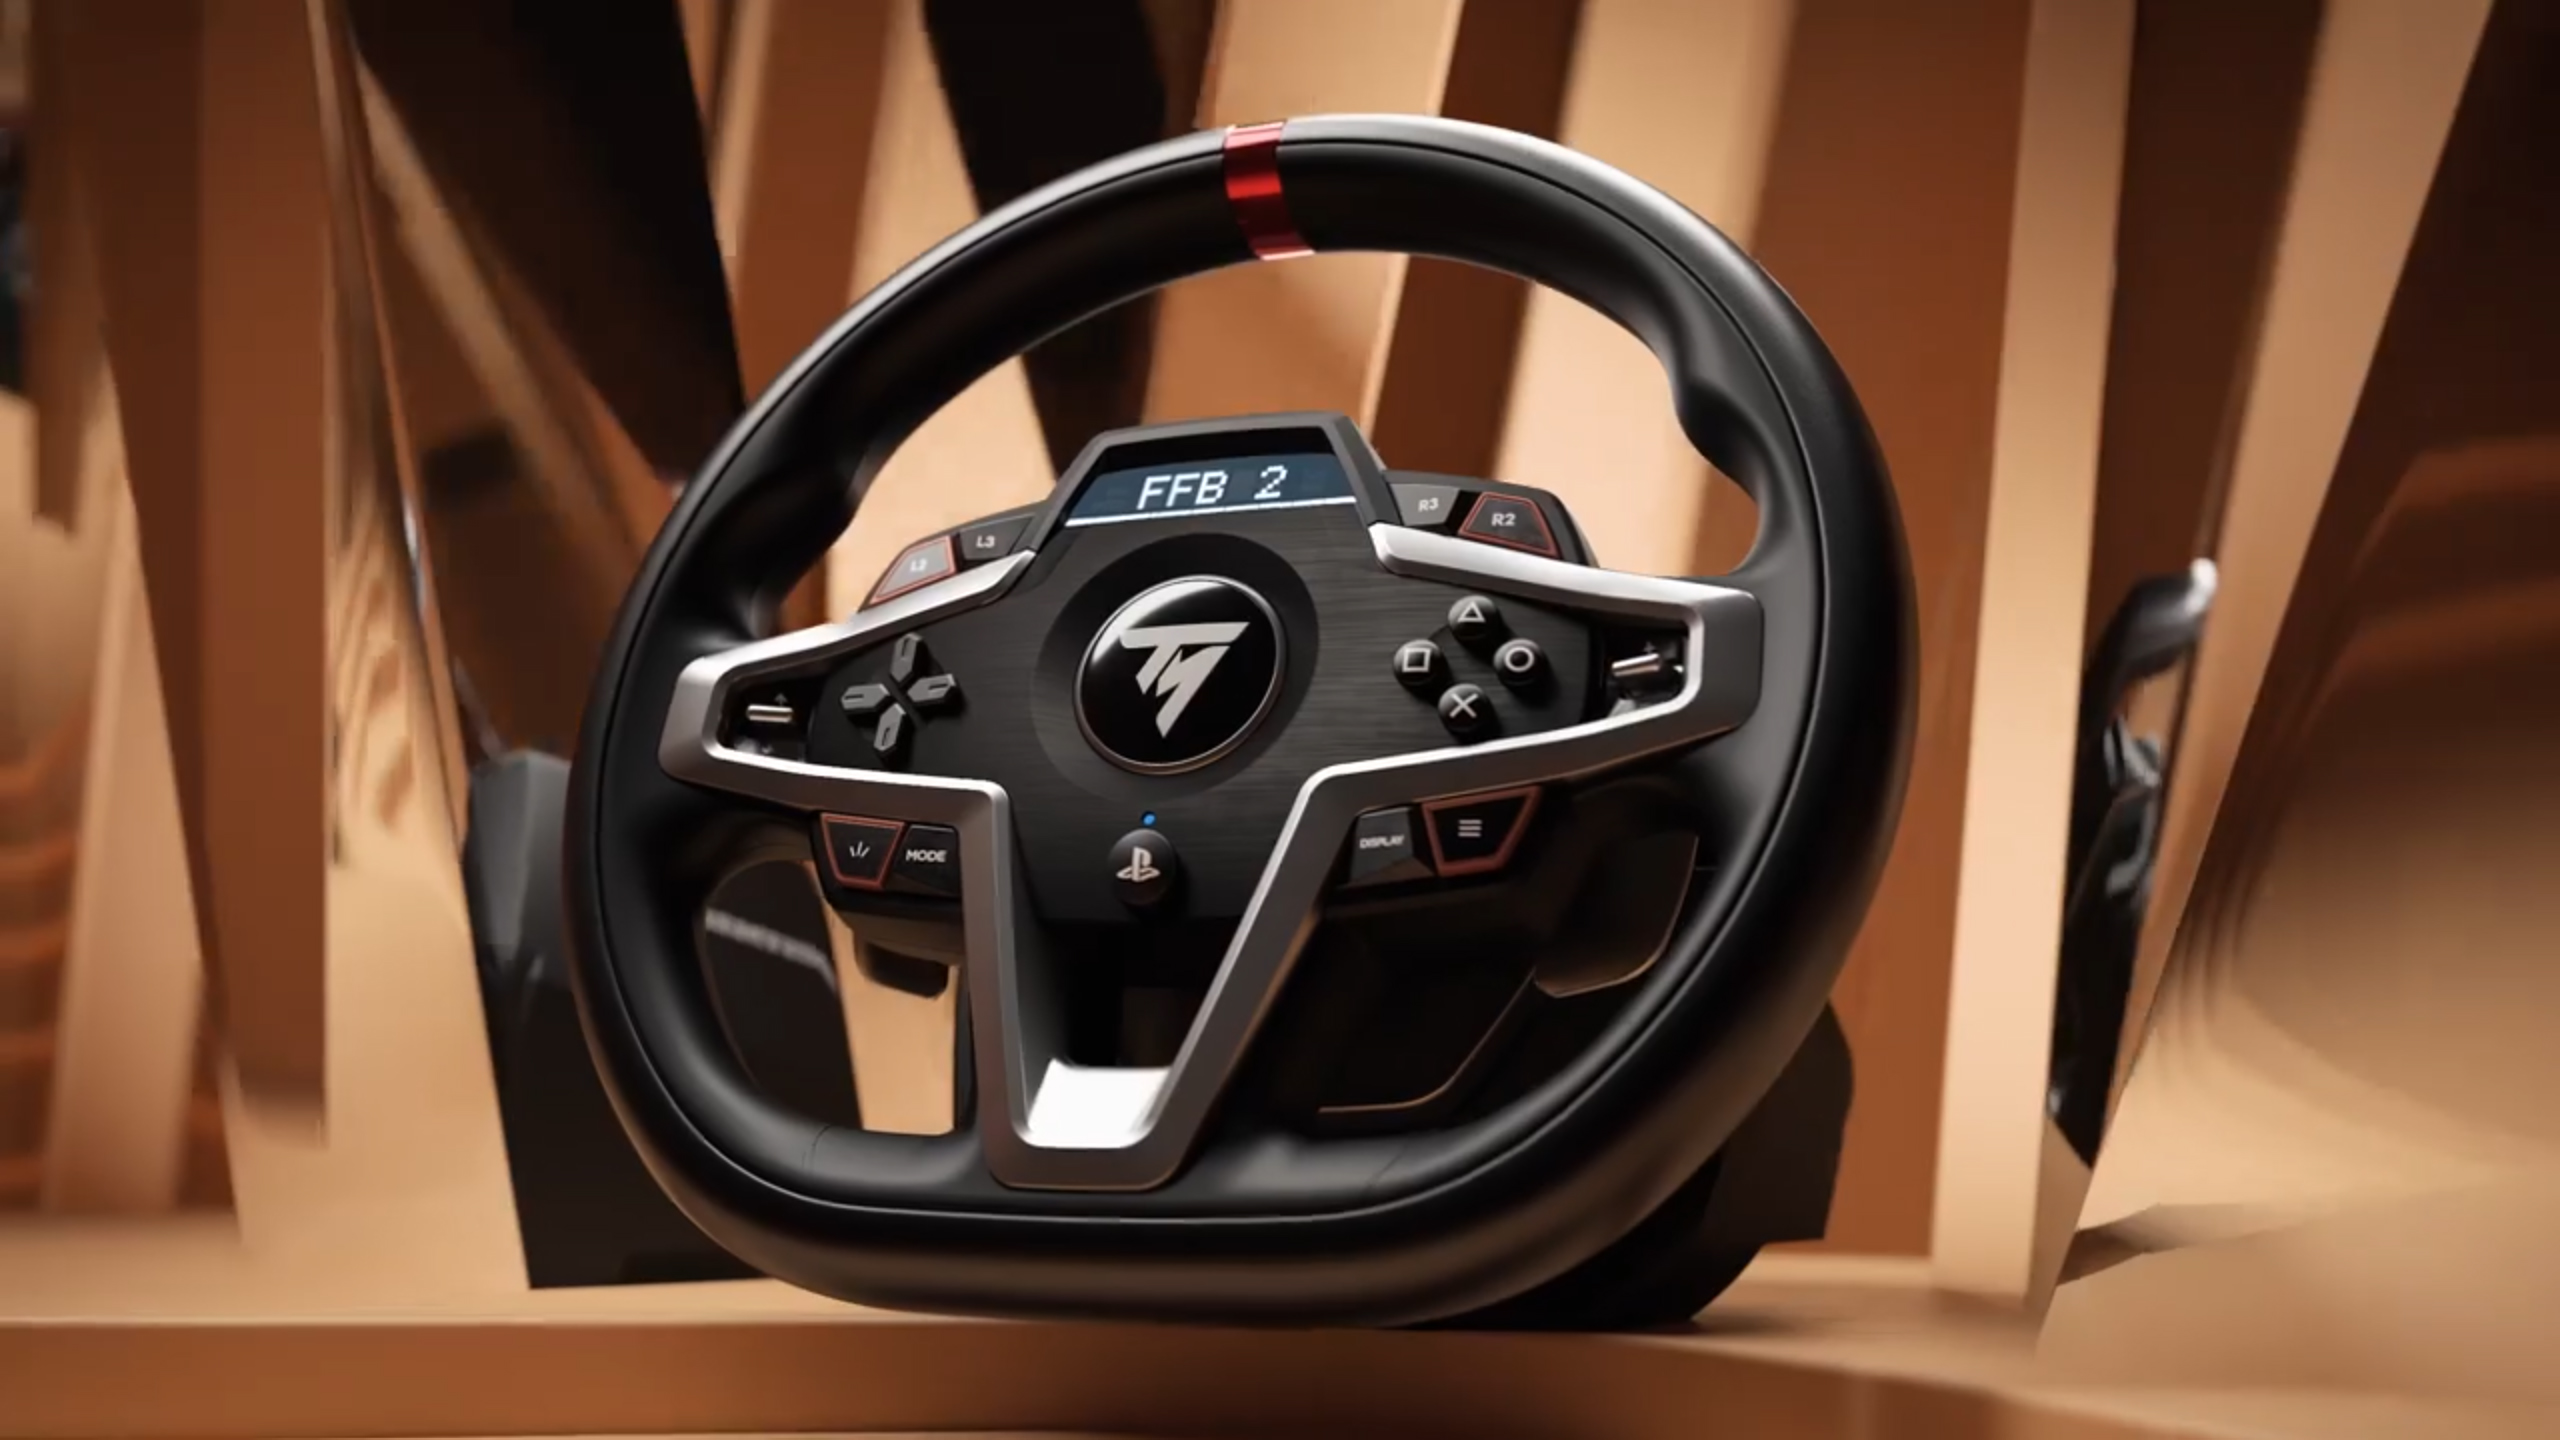 Thrustmaster Officially Reveals T248 Hybrid Drive Wheel for